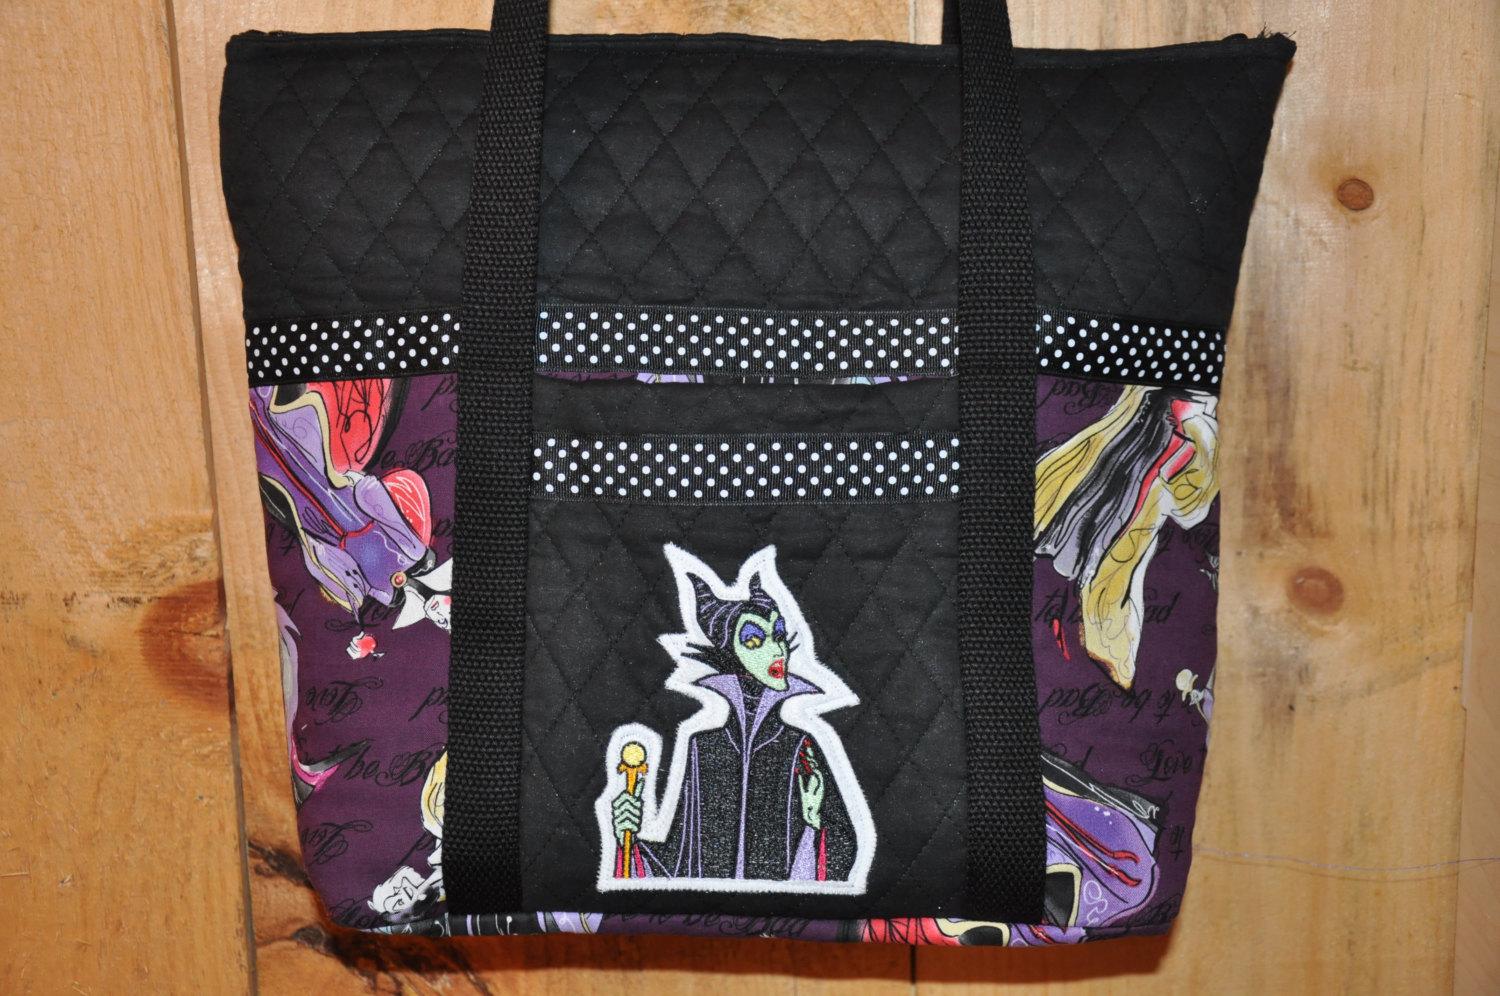 Bag with Maleficent embroidery design